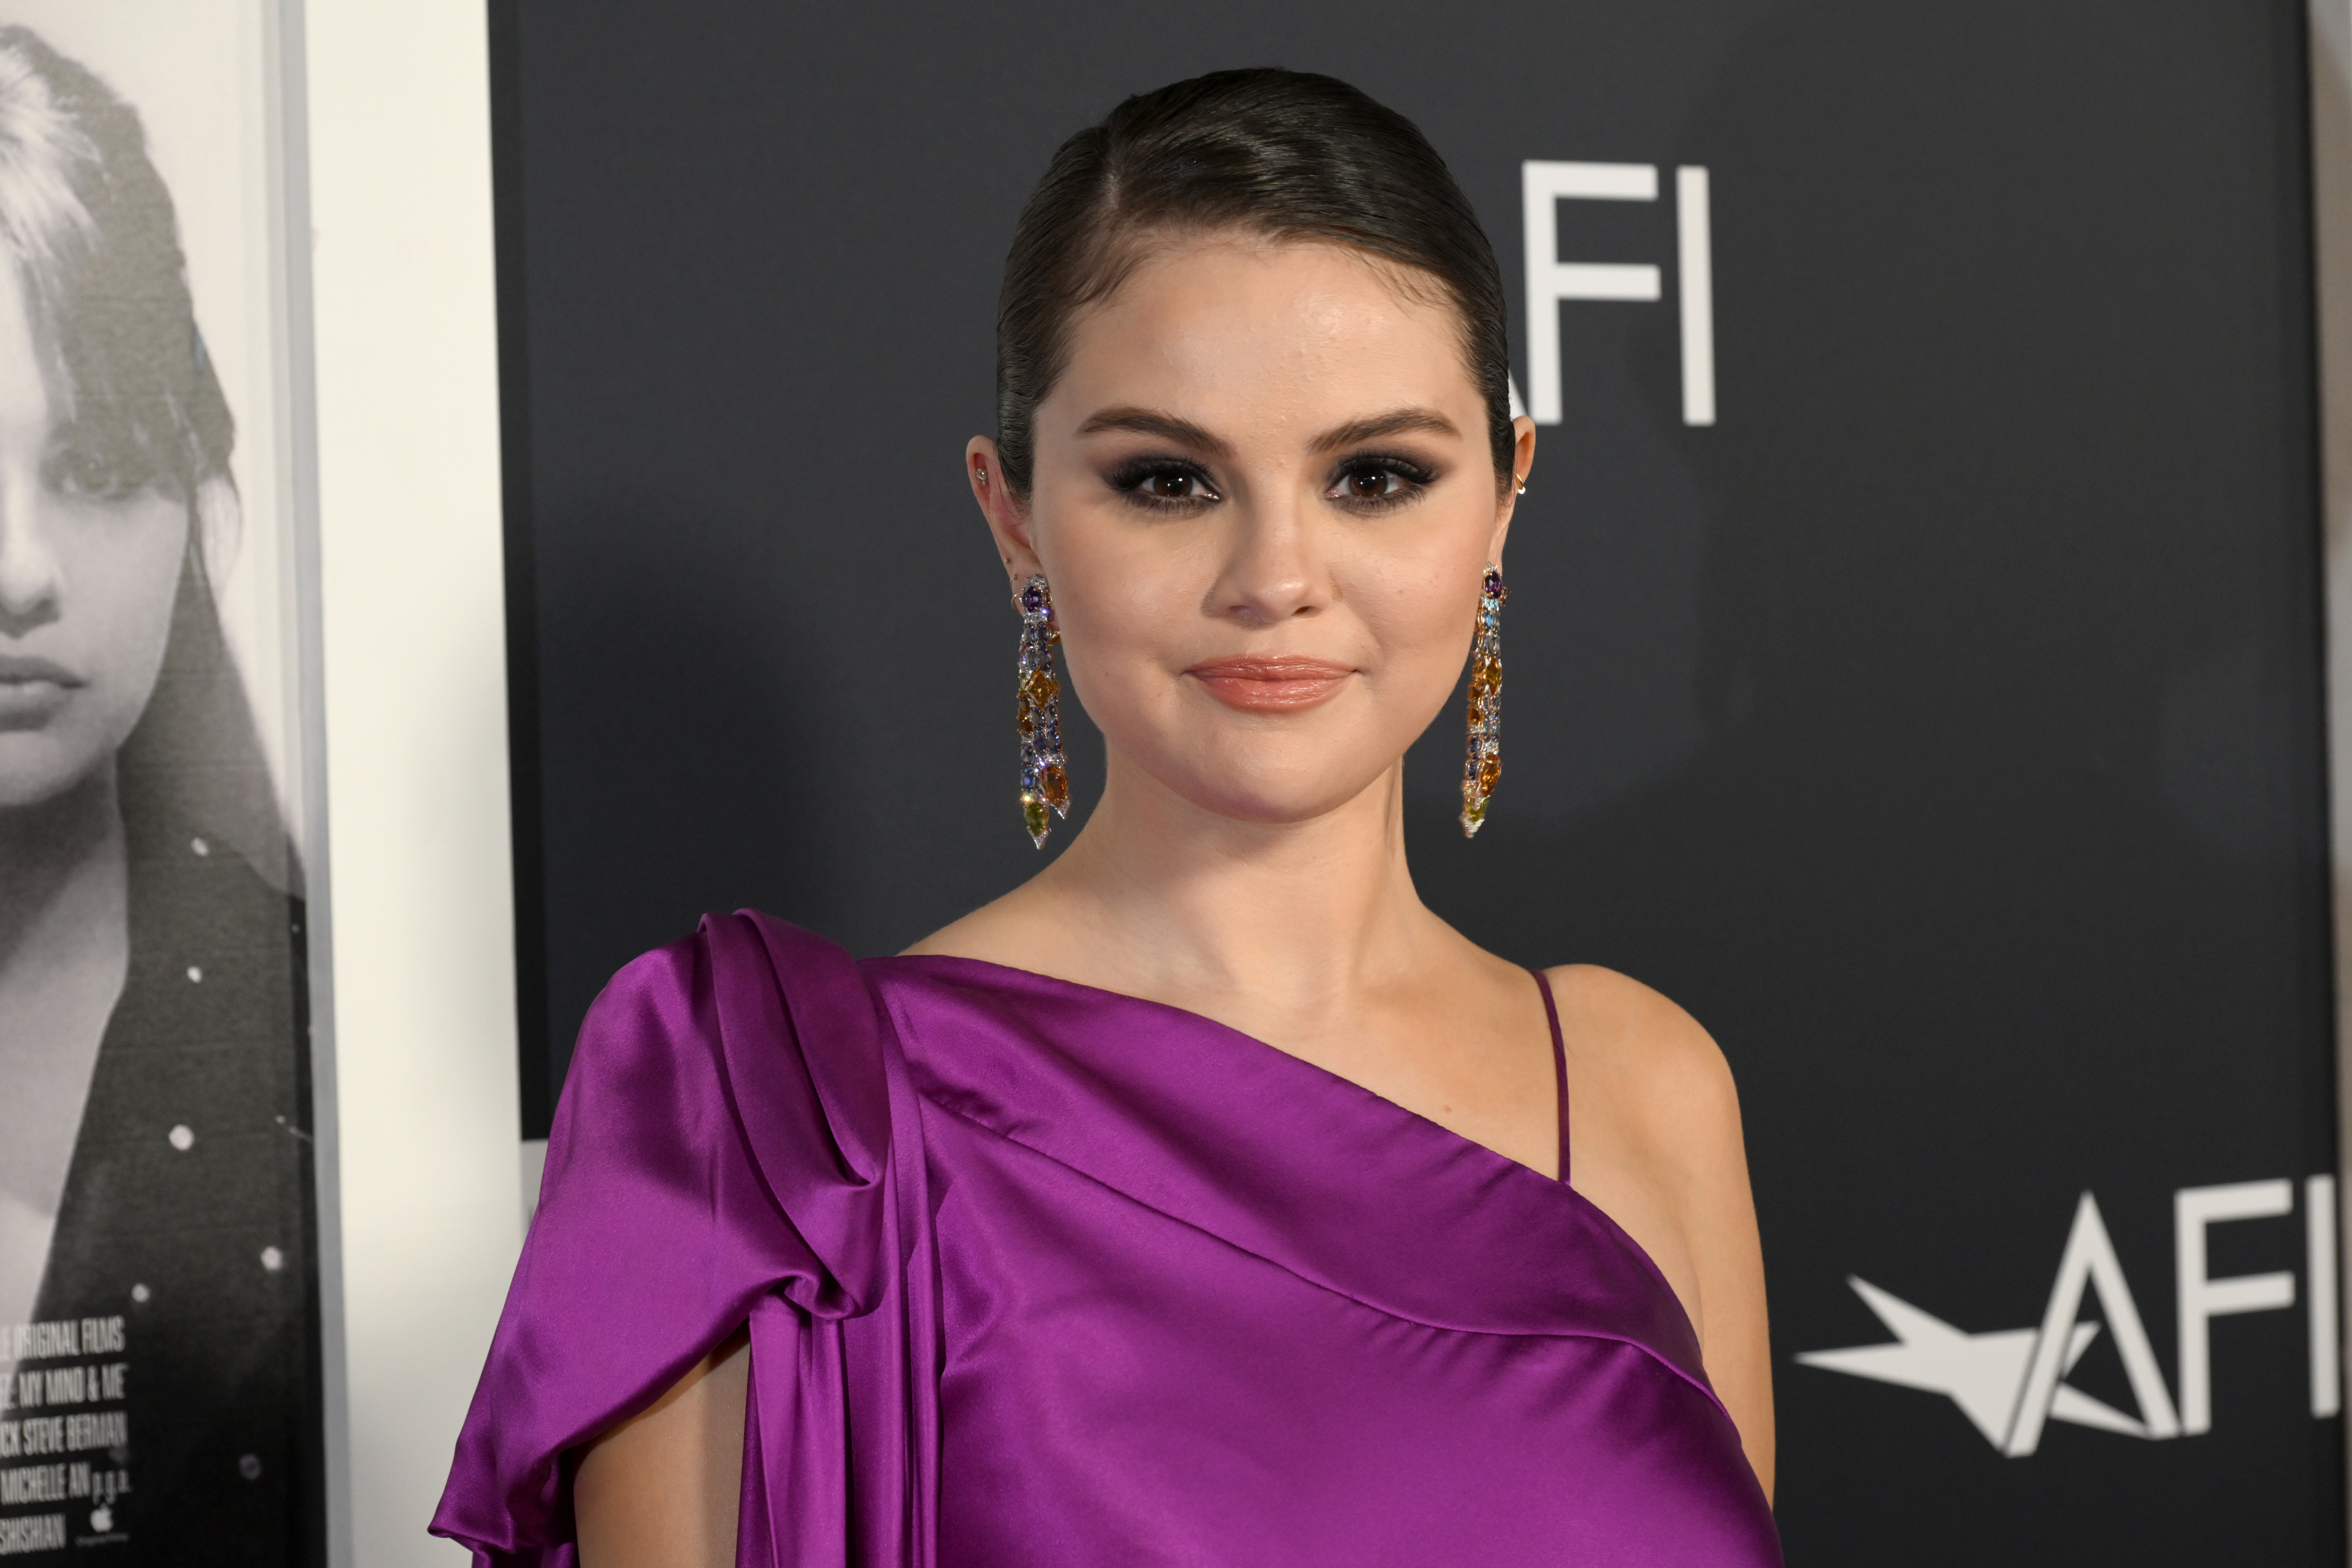 The actress and singer Selena Gomez, at the AFI Fest 2022.